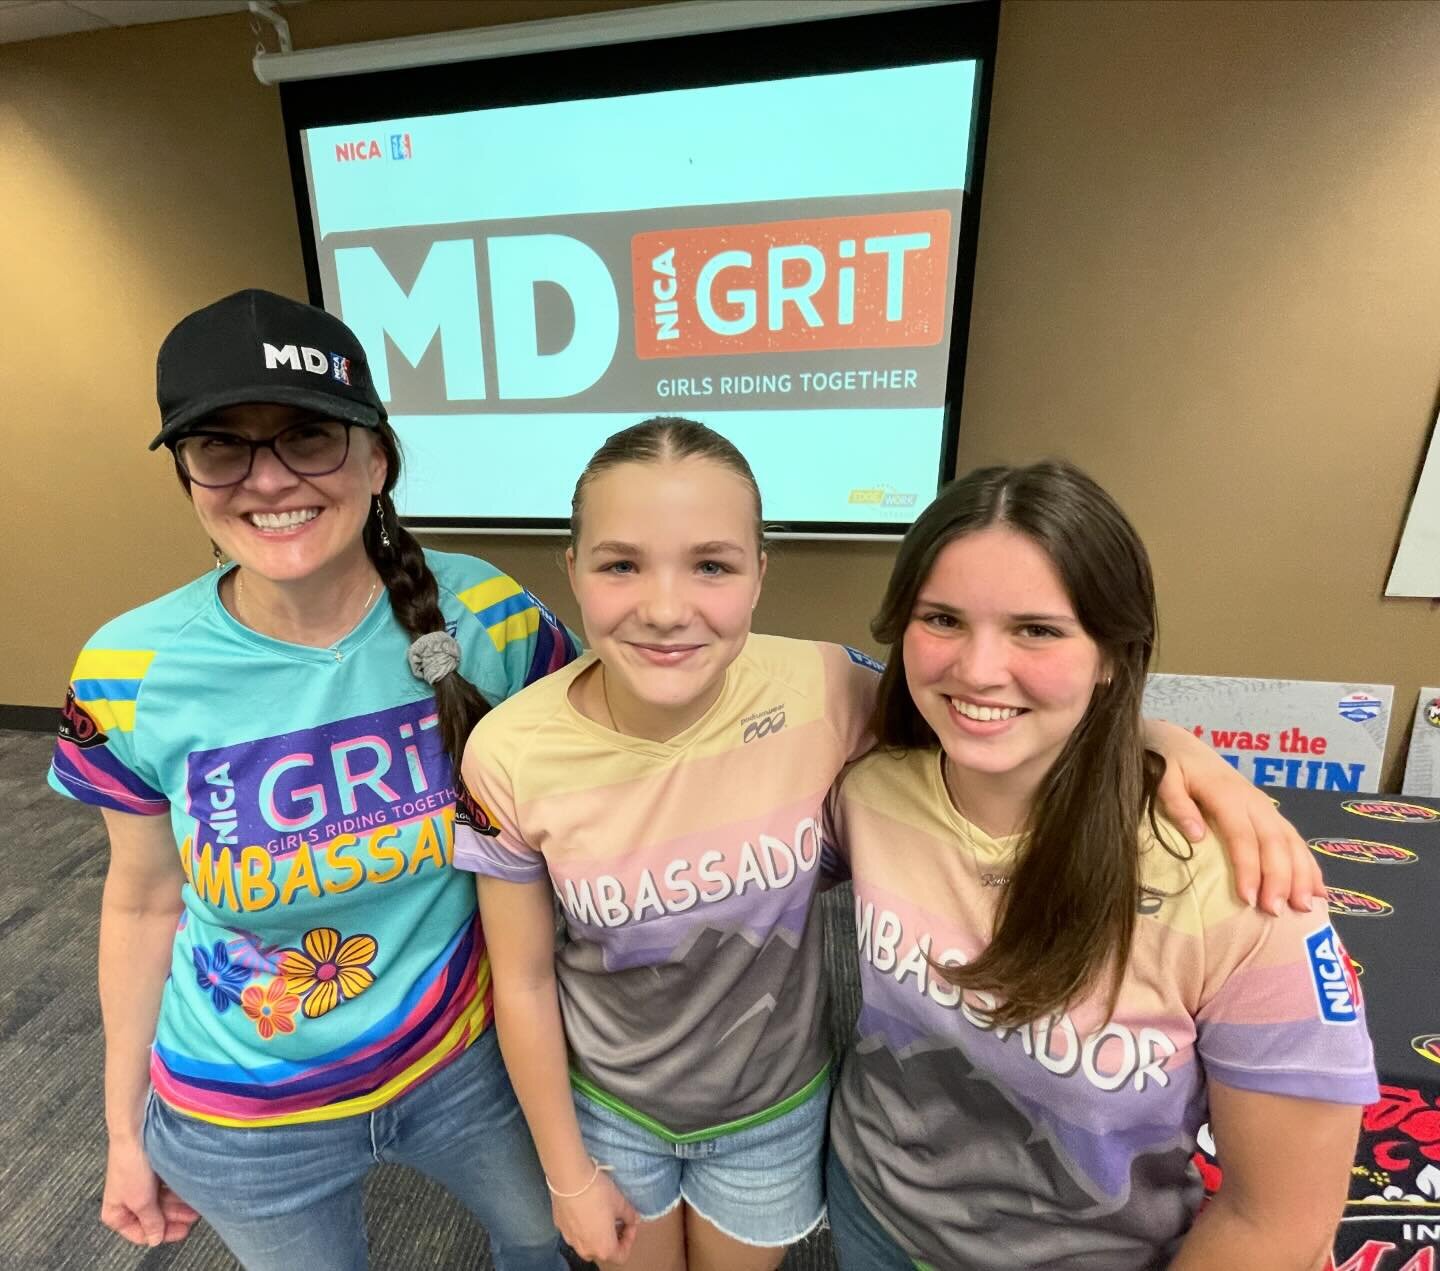 Ambassadors Ruby Frank and Allison Boyd shared their experiences with GRiT at the MICL Coaches Summit and totally crushed it!  I am so proud of these girls!  #micl #miclgrit #gritambassador #marylandmtb #moregirlsonbikes